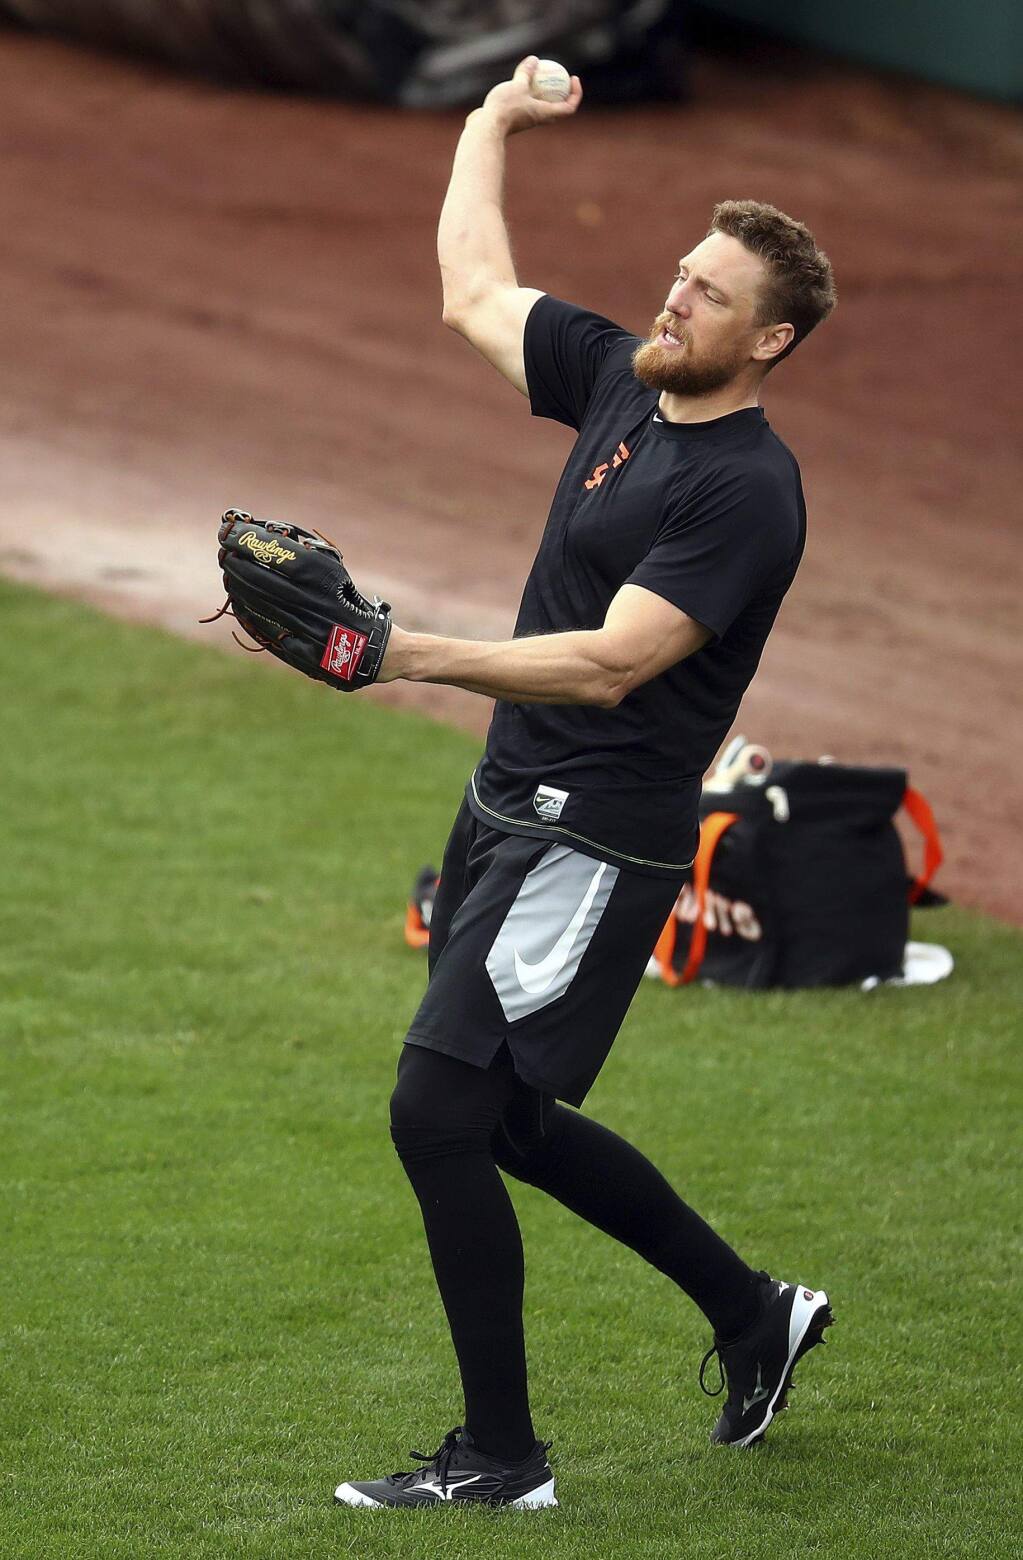 Coronavirus coping: San Francisco Giants' Hunter Pence, wife Lexi share how  they're sheltering in place - ABC7 San Francisco